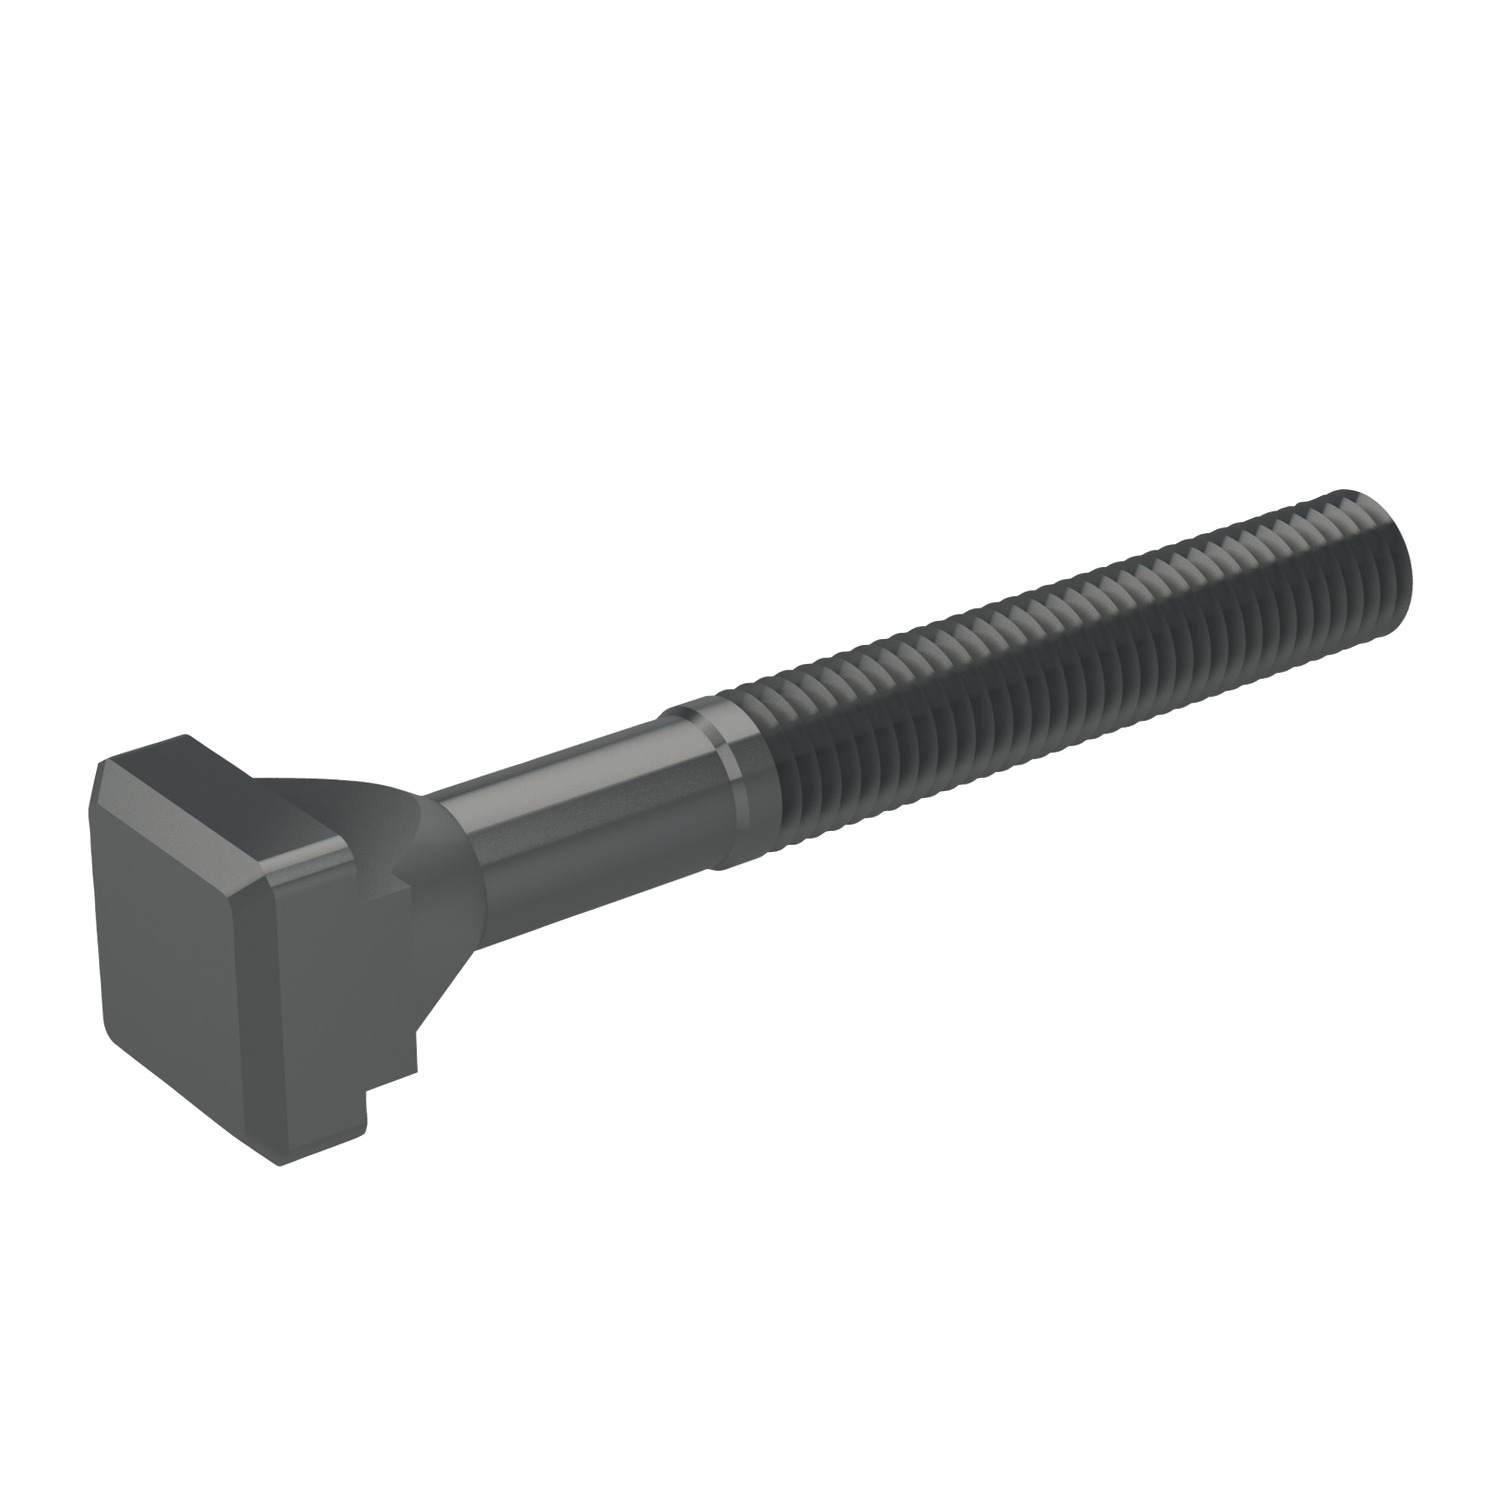 Product 21000, T-Slot Bolts strength class 8,8/10,9 / 